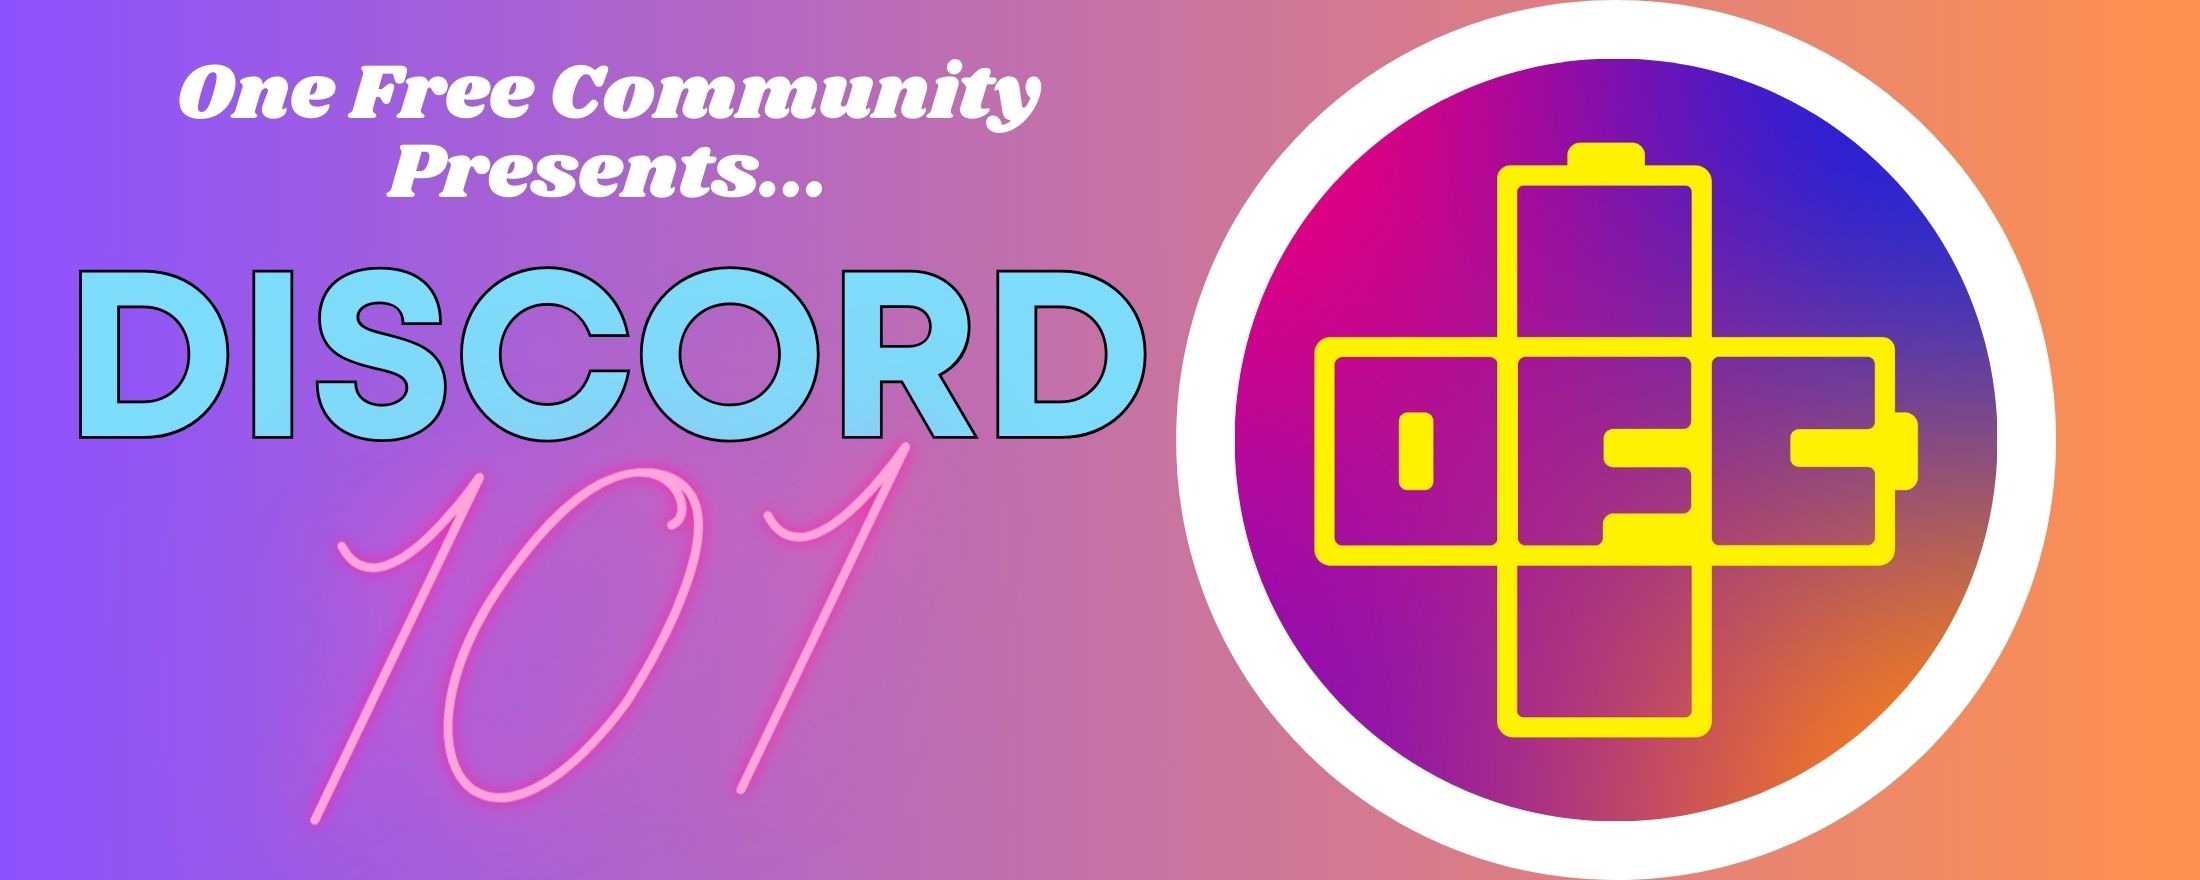 One Free Community Presents... Discord 101, background purple and orange with OFC loco in a plus sign made of batteries.